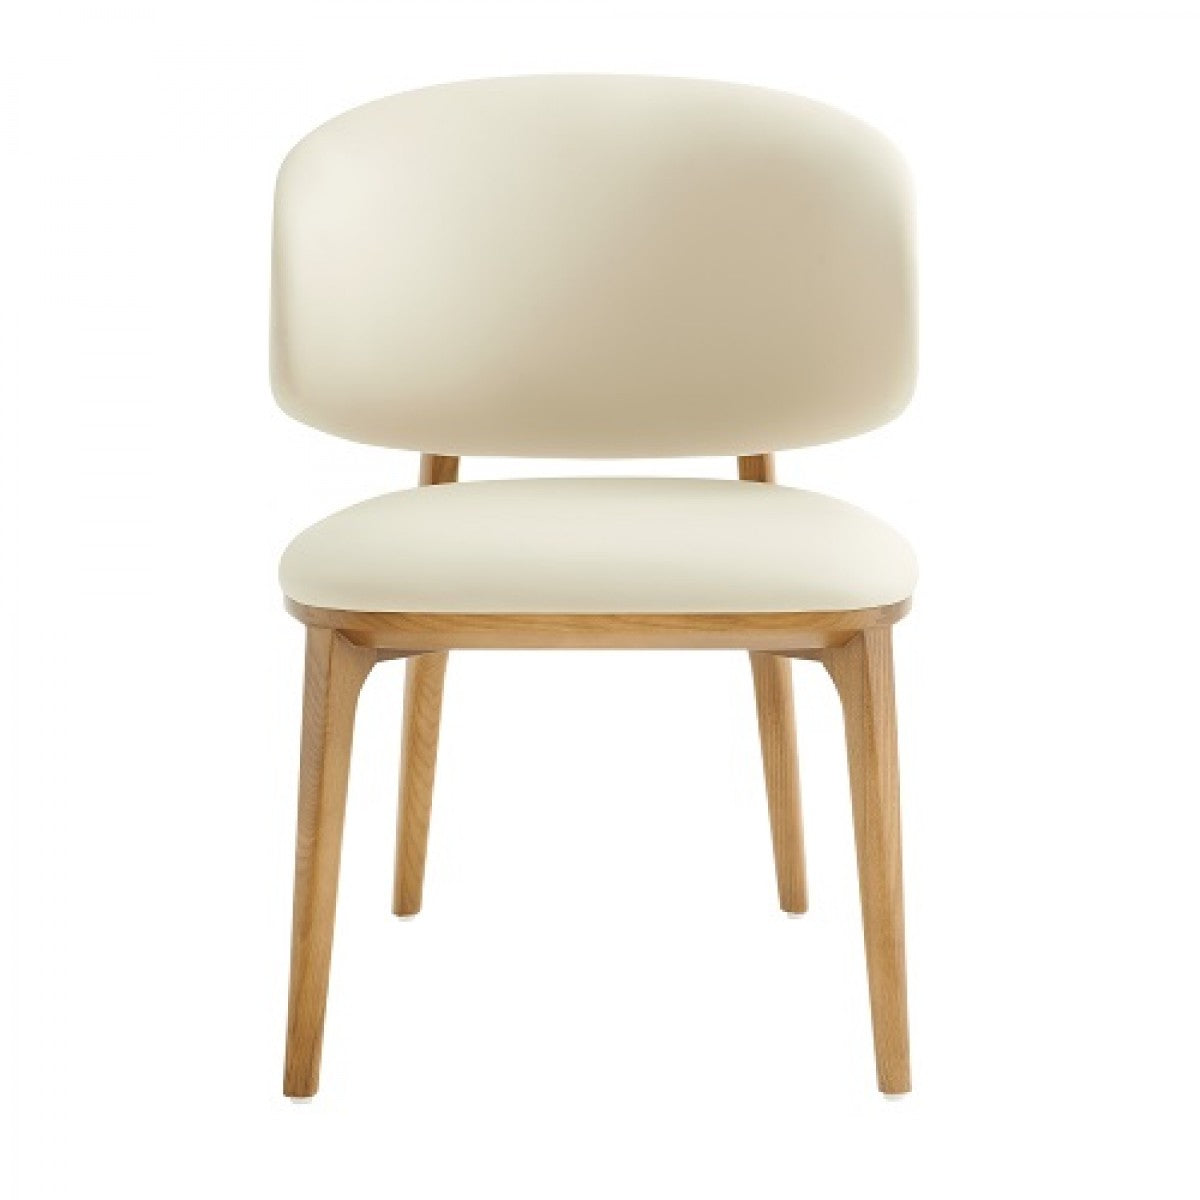 Modrest Chance - Contemporary Cream Fabric and Brown Leatherette Walnut Dining Chair